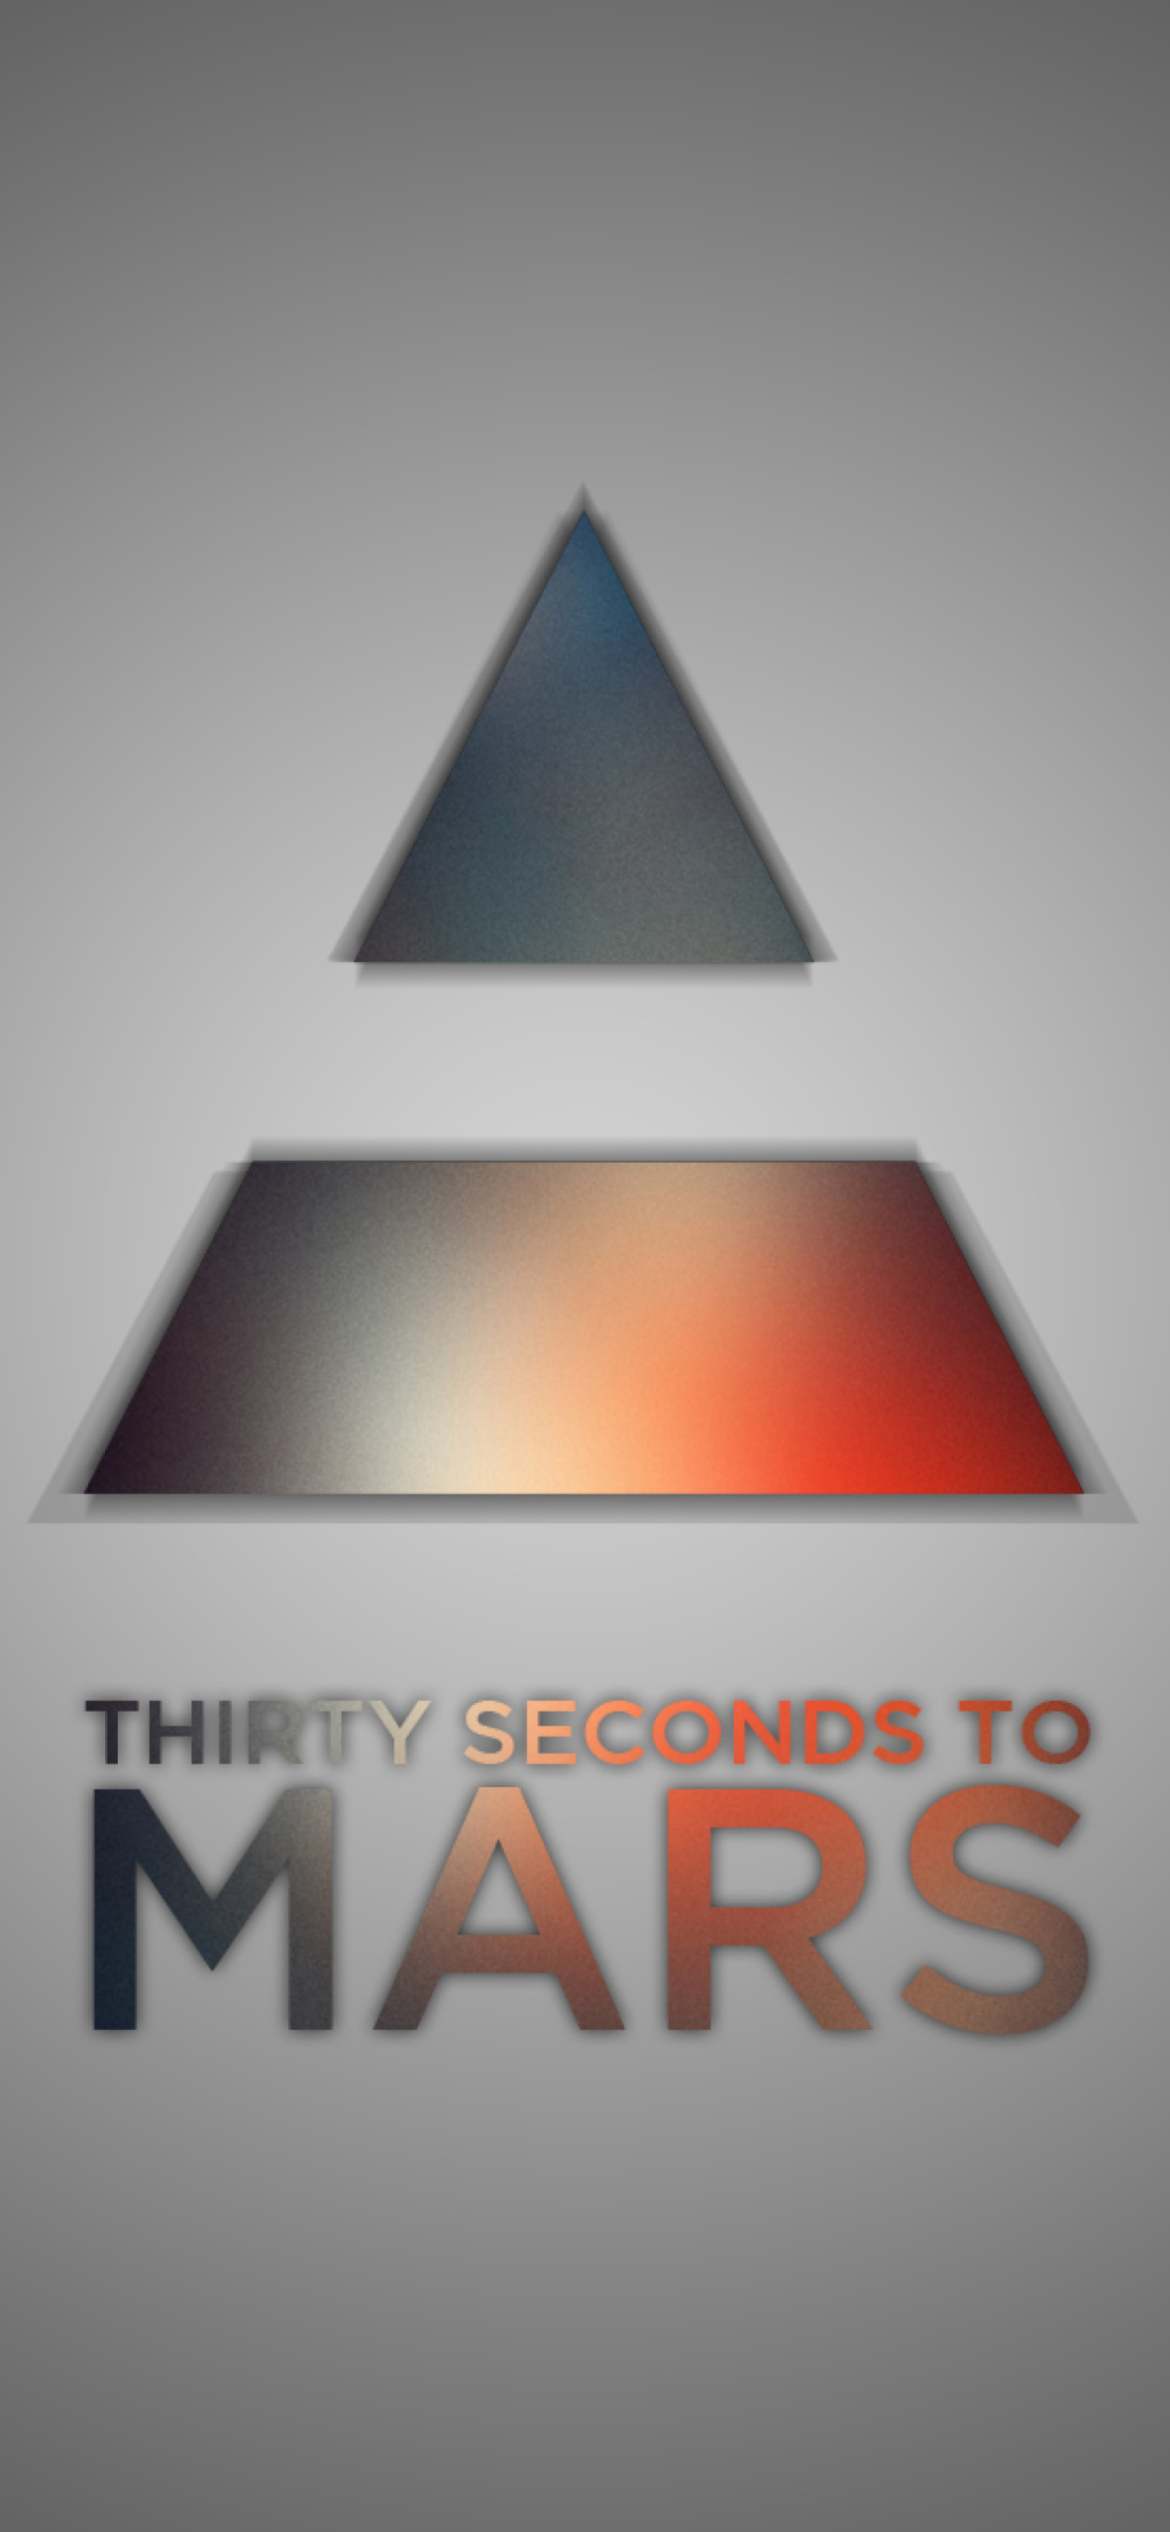 Thirty Seconds To Mars Logo wallpaper 1170x2532